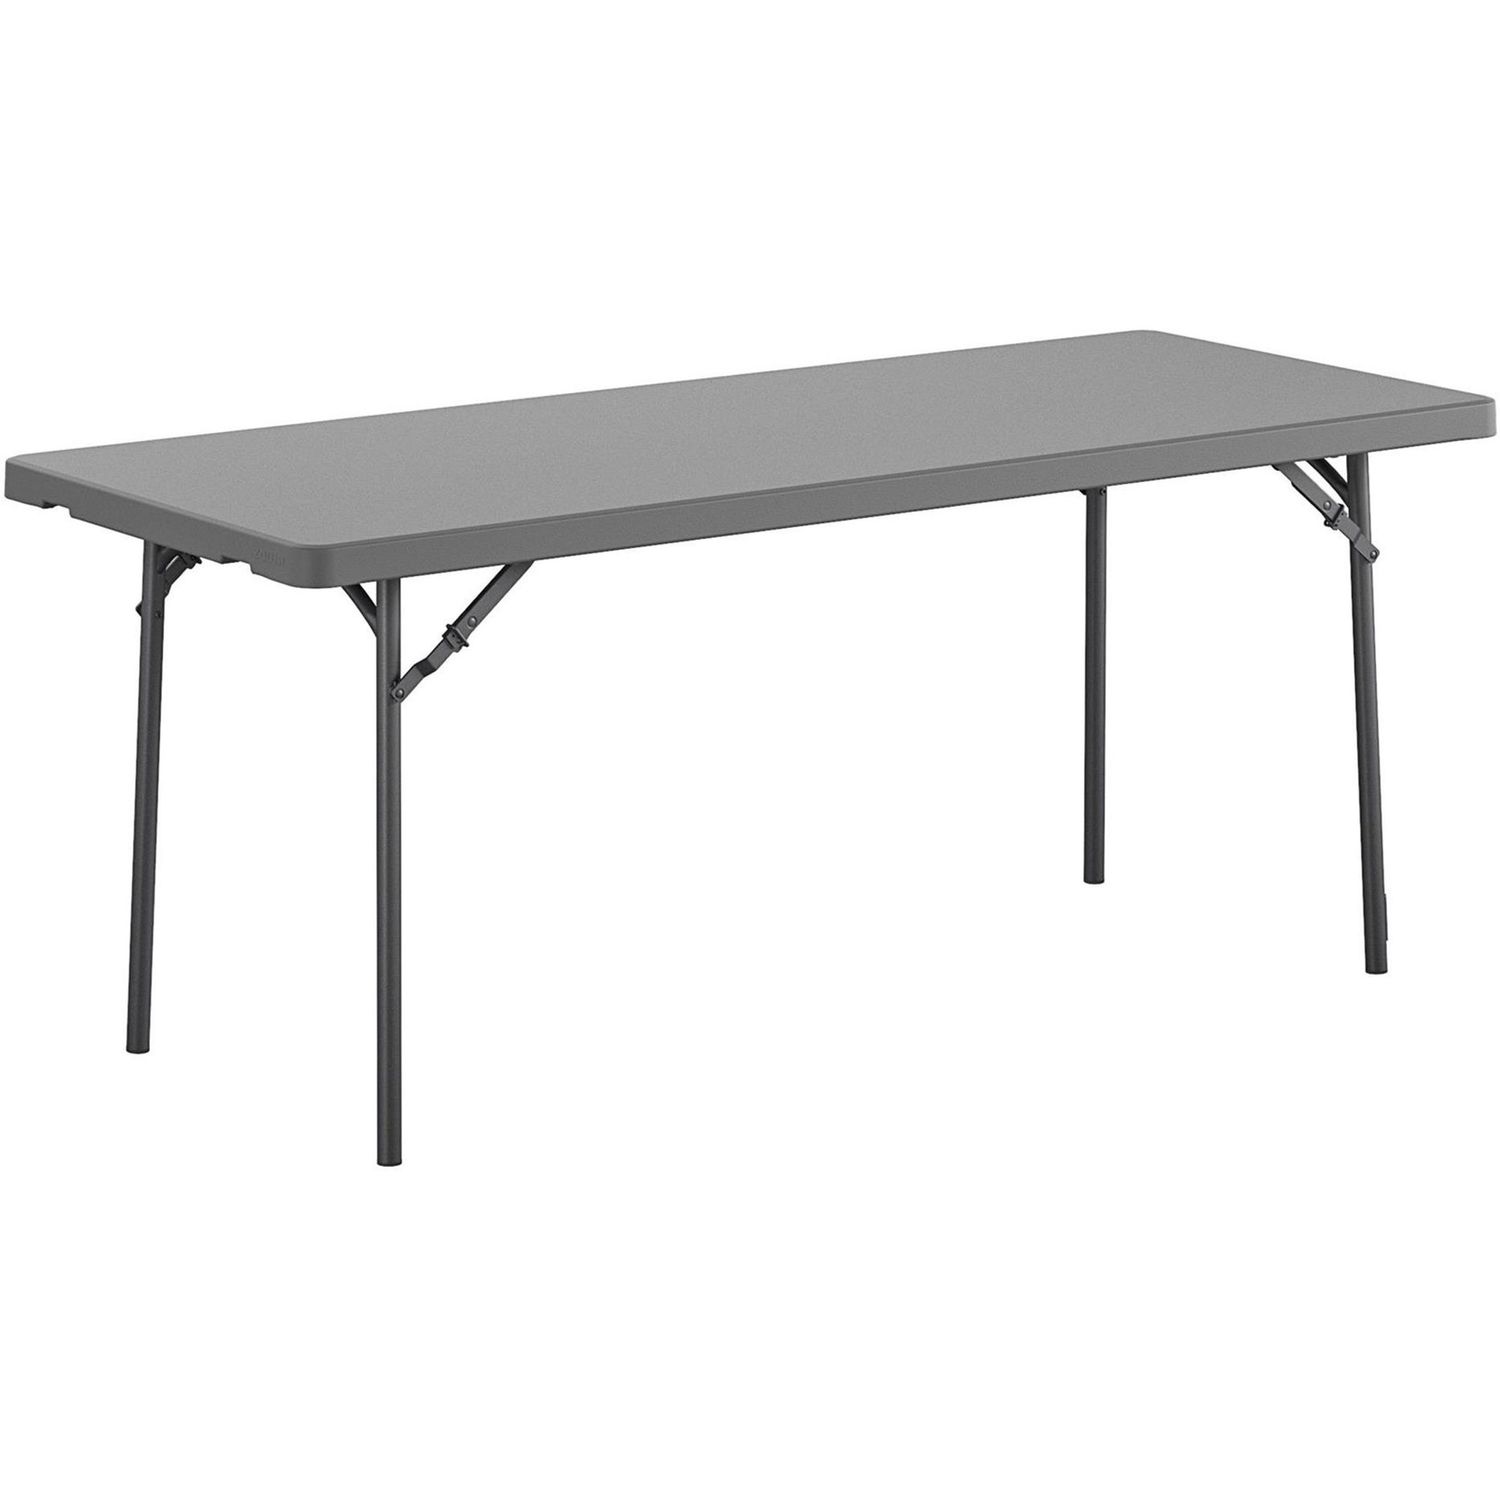 Zown Corner Blow Mold Large Folding Table 4 Legs, 72" Table Top Width x 30" Table Top Depth, 29.25" Height, Gray, High-density Polyethylene (HDPE), Resin